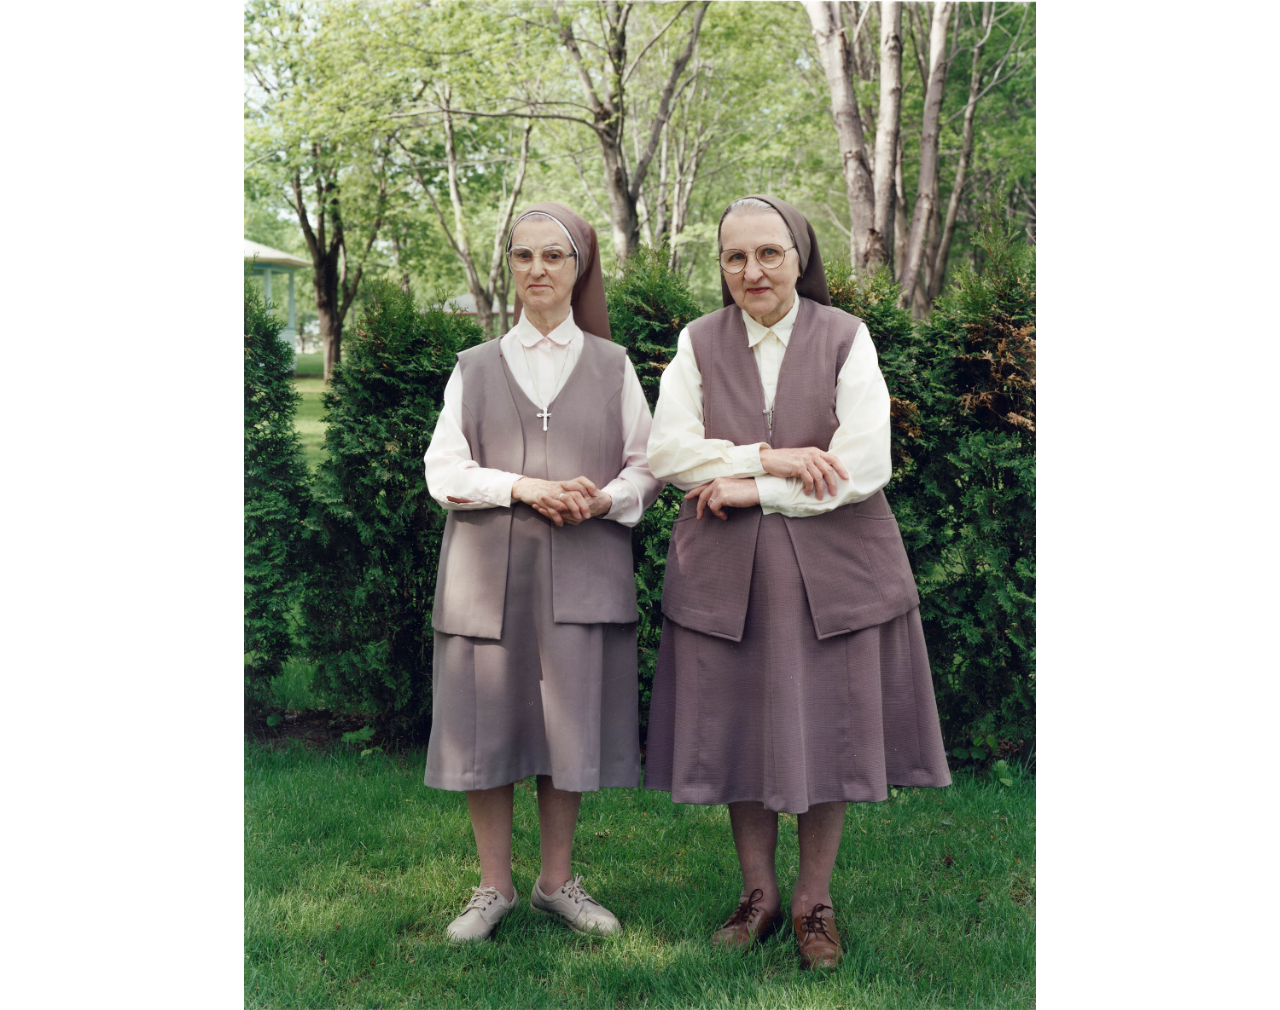 Two nuns standing for photograph in garden